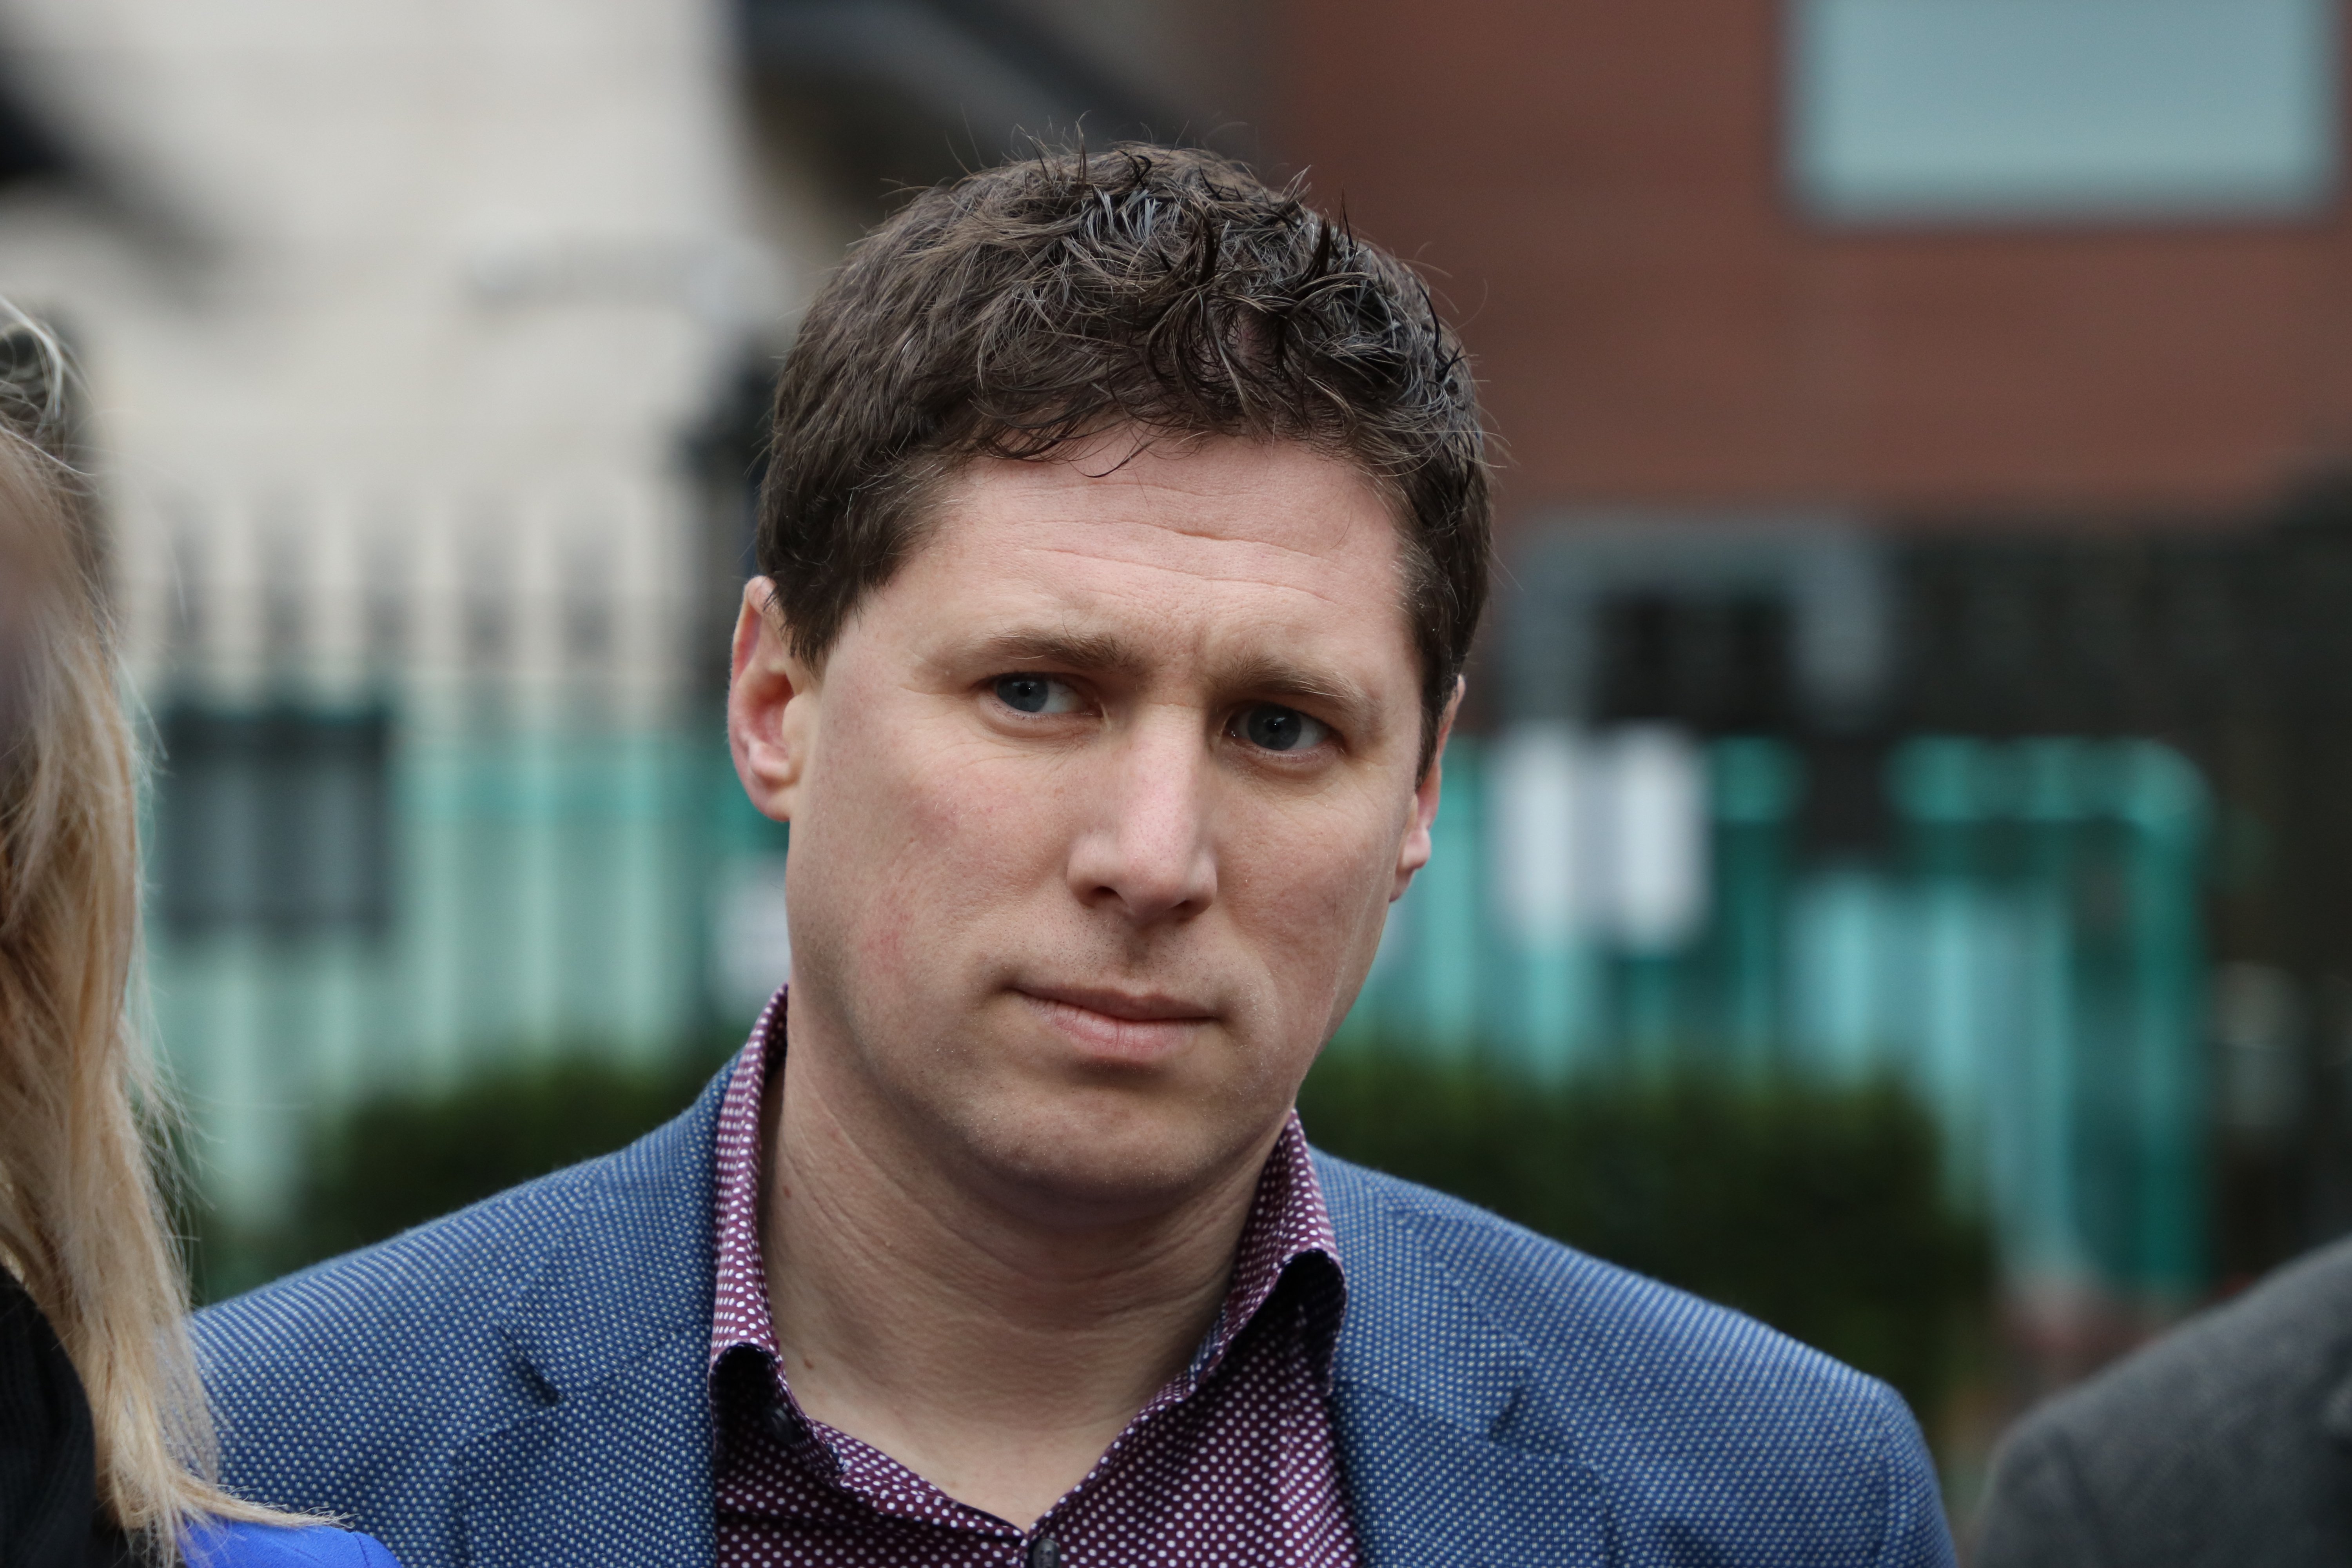 Carthy: "The EU leaders' silence makes them accomplices to the Catalonia situation"